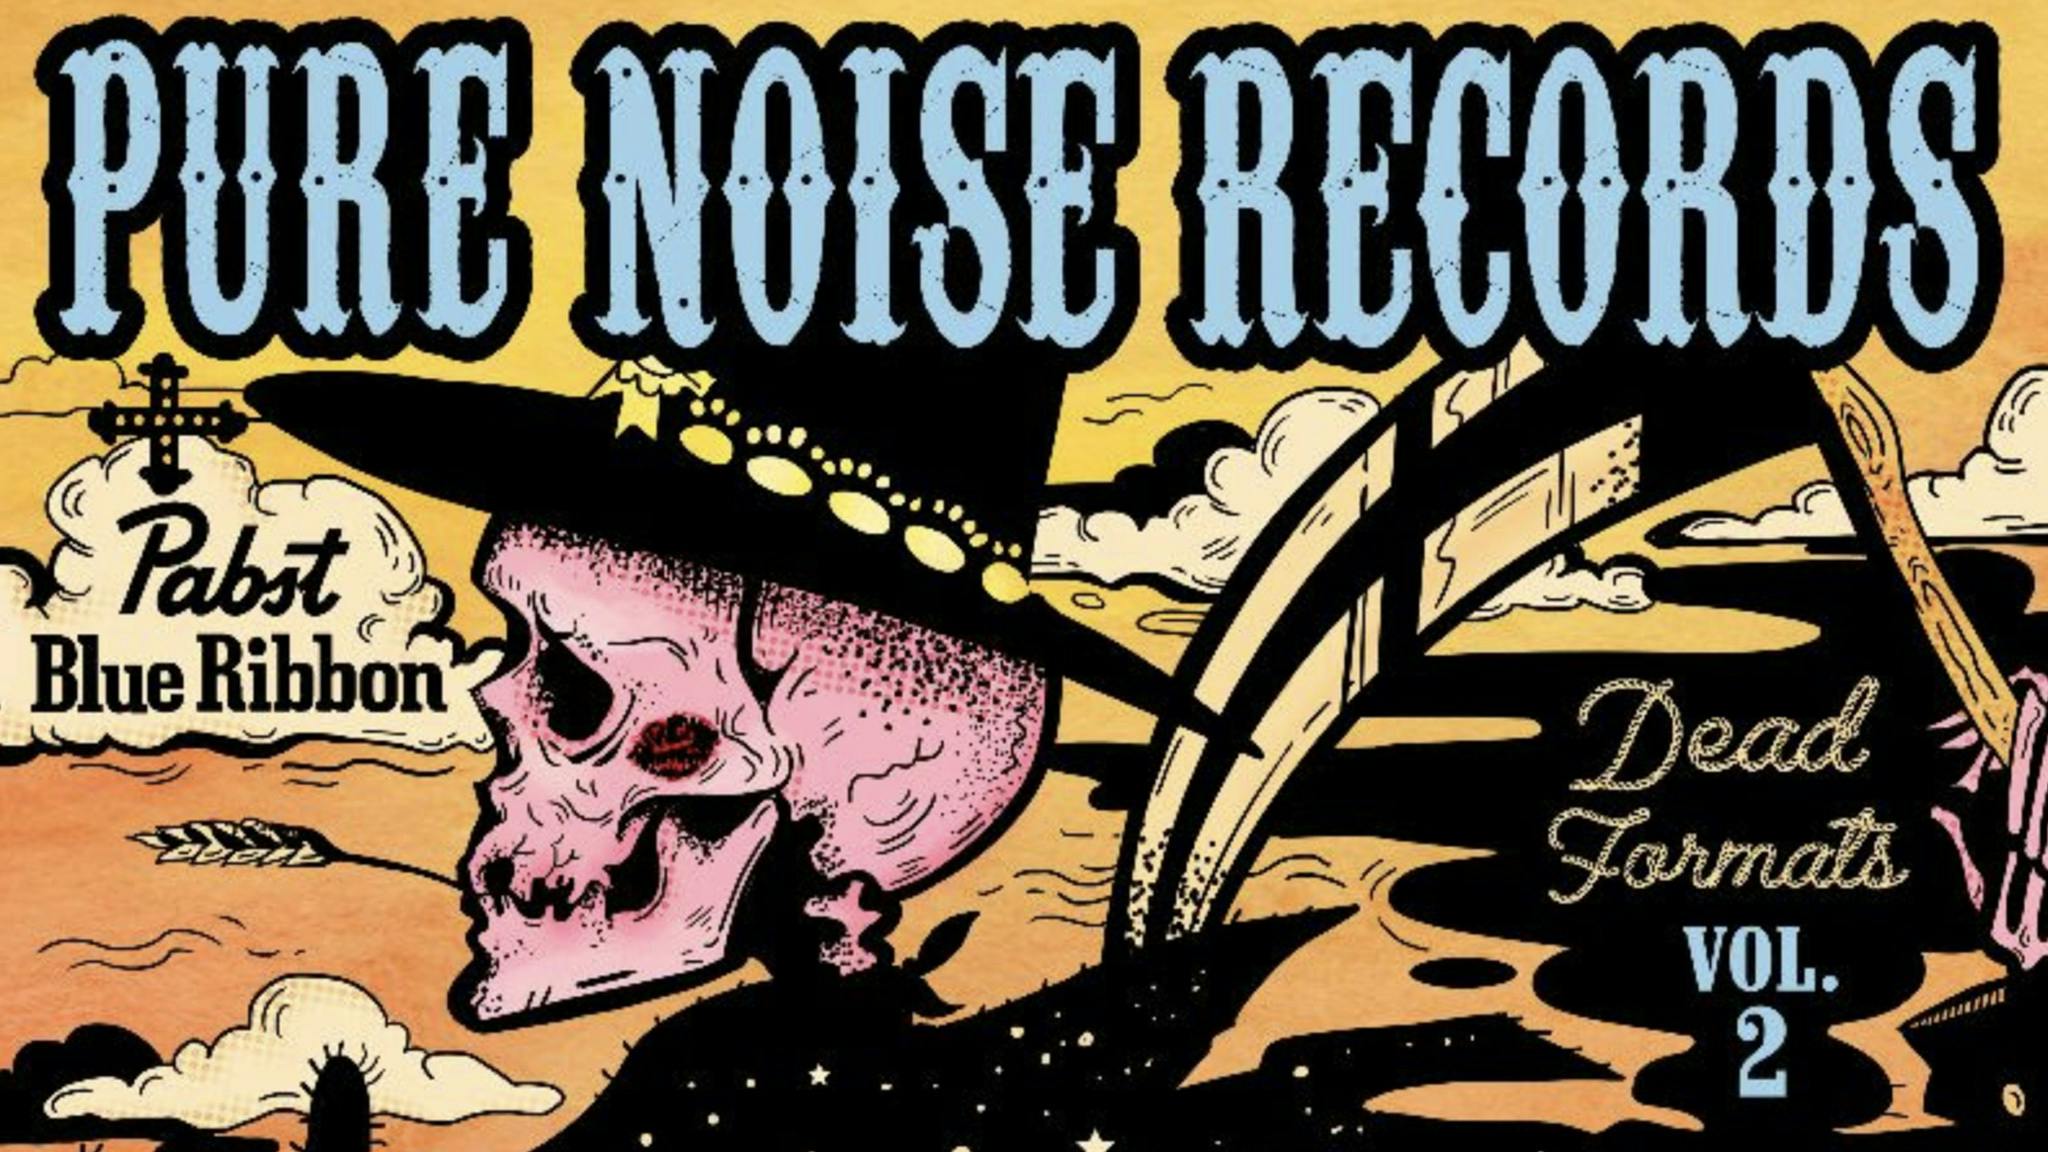 Pure Noise artists to cover Slipknot, Elton John, Nirvana and more on new Dead Formats Vol. 2 compilation